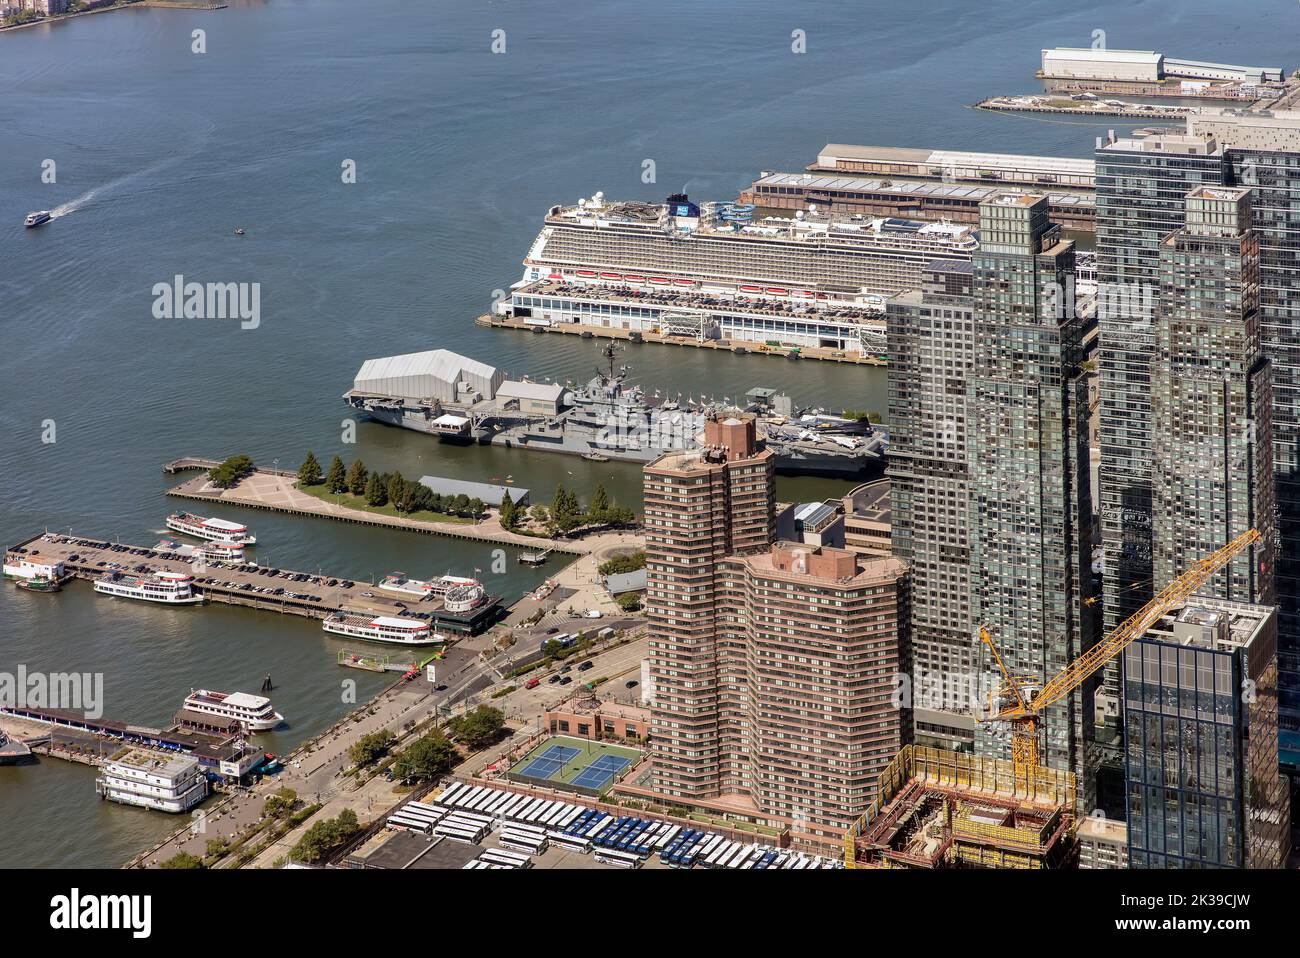 Aerial view of Ships and boats moor on piers in the Hudson River Manhattan, NYC, USA Stock Photo